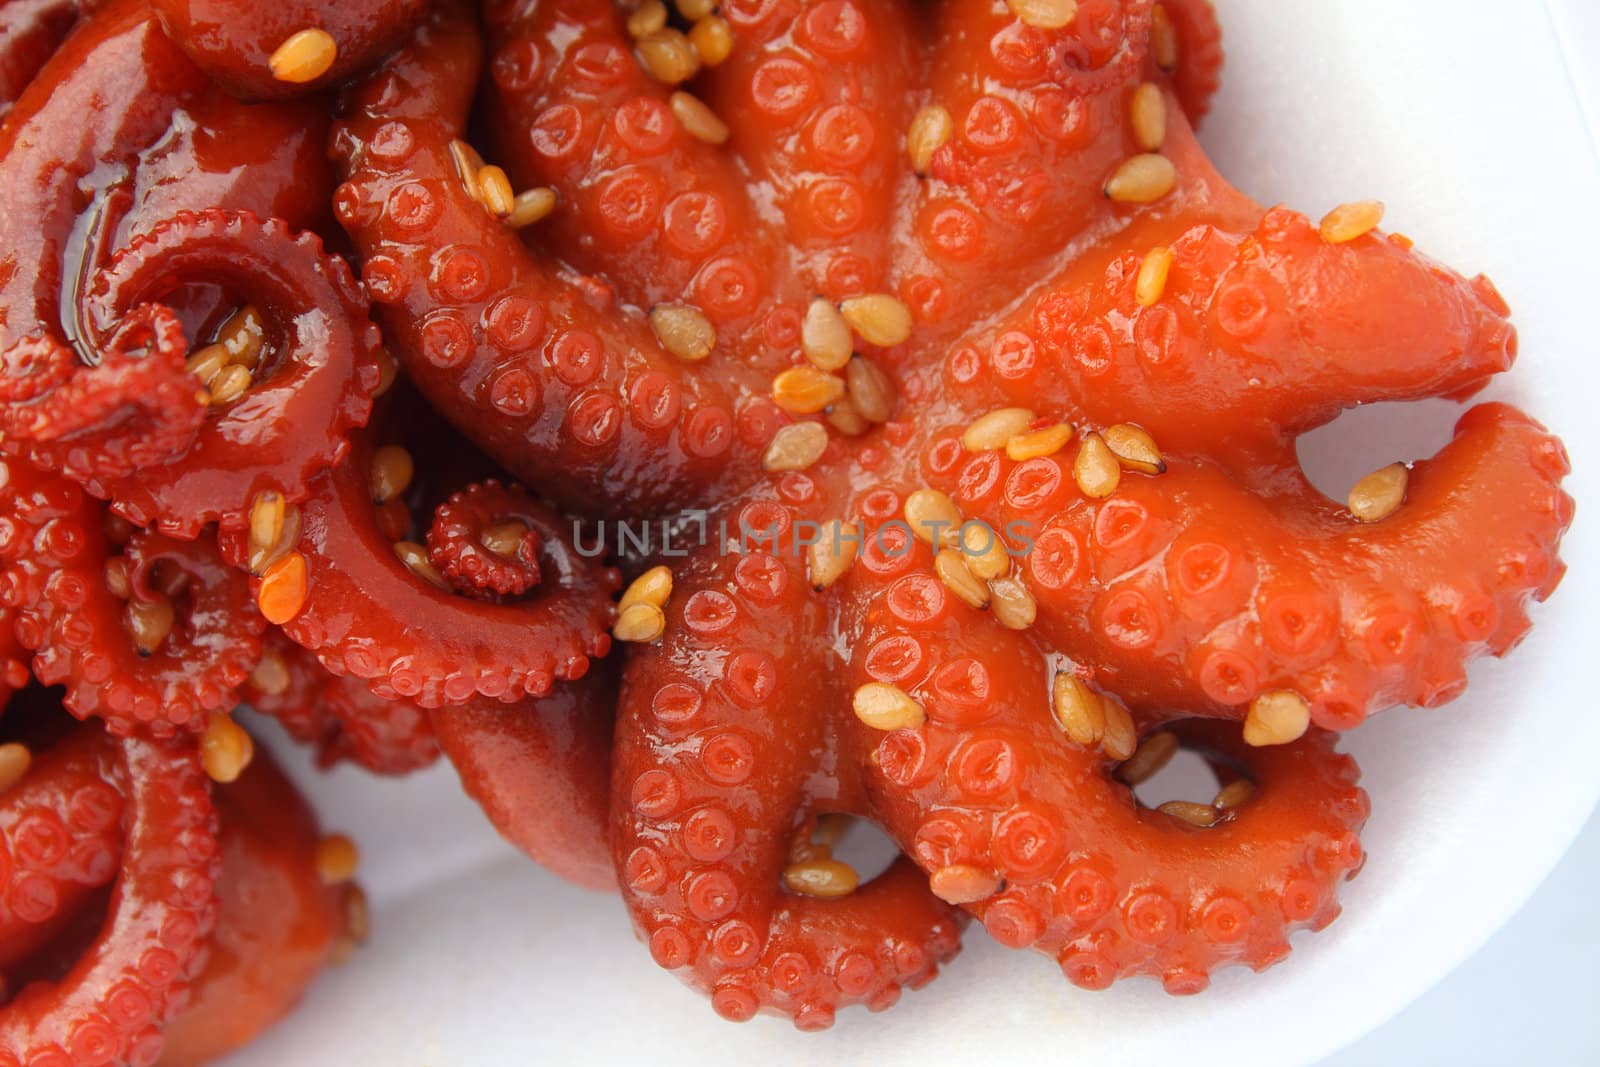 Marinated baby octopus with sesame seeds by pulen